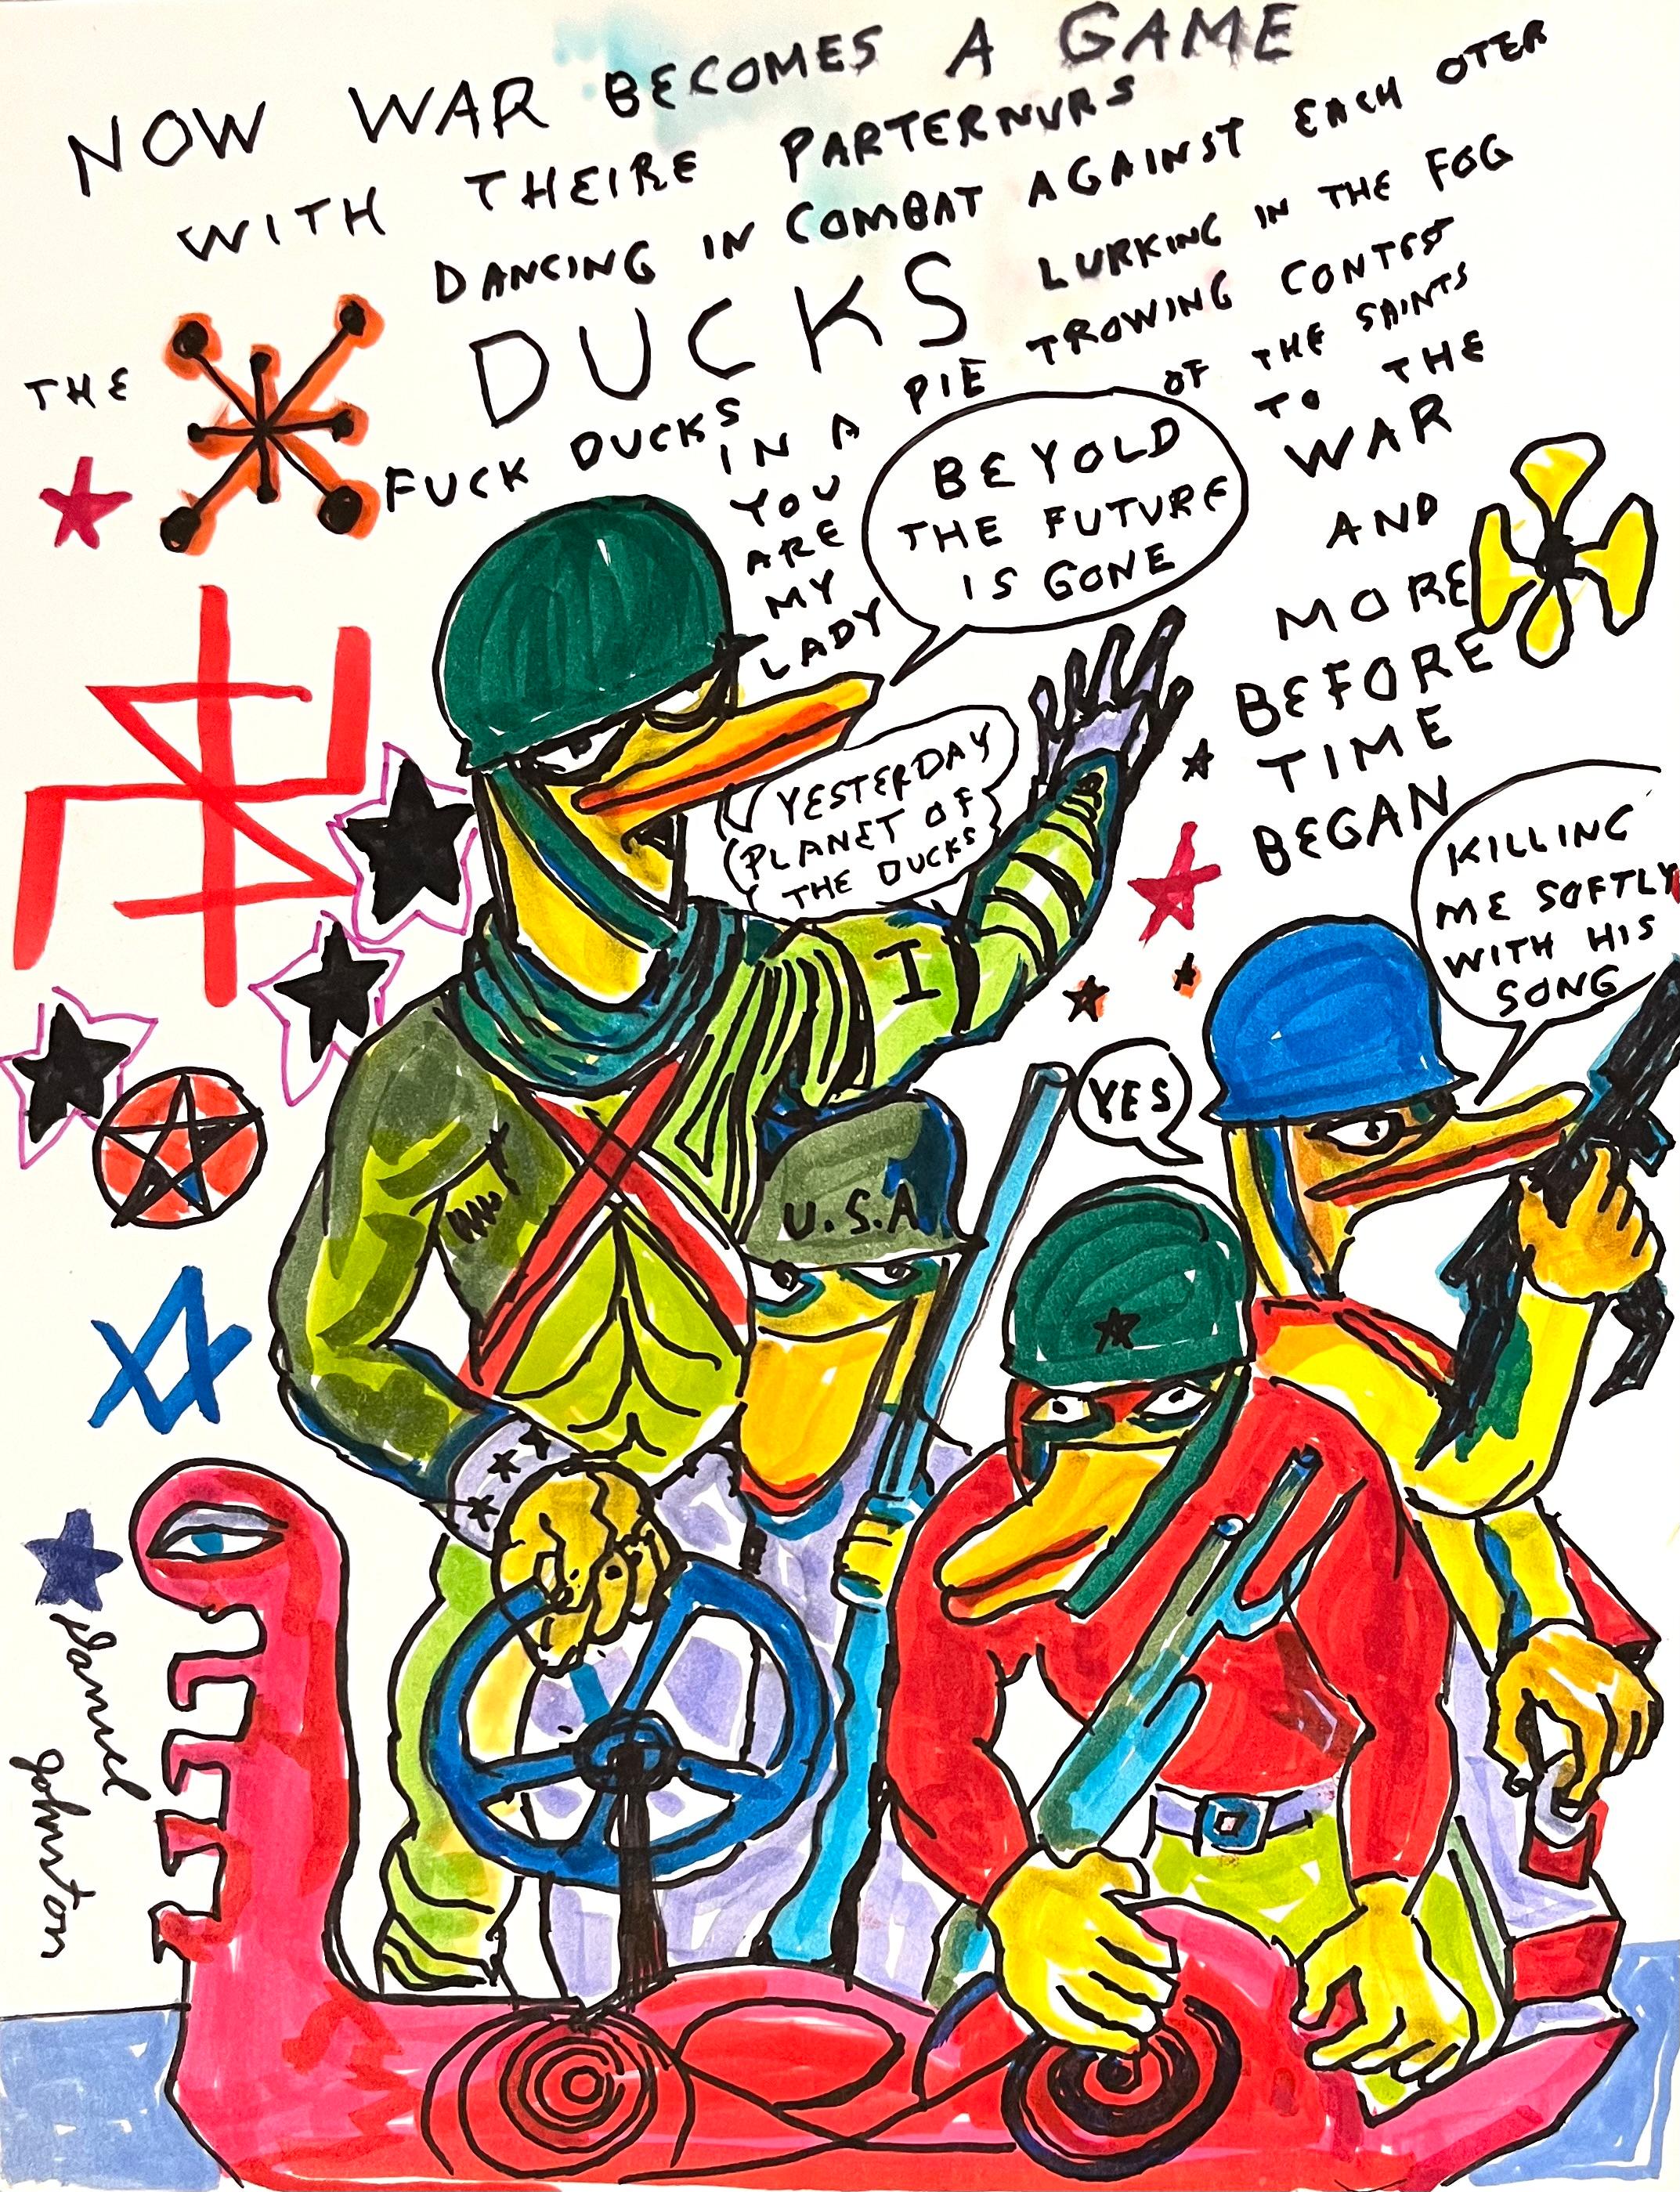 Now War Becomes A Game - Figure Ink Drawing on Paper, Outsider Art, Duck Wars